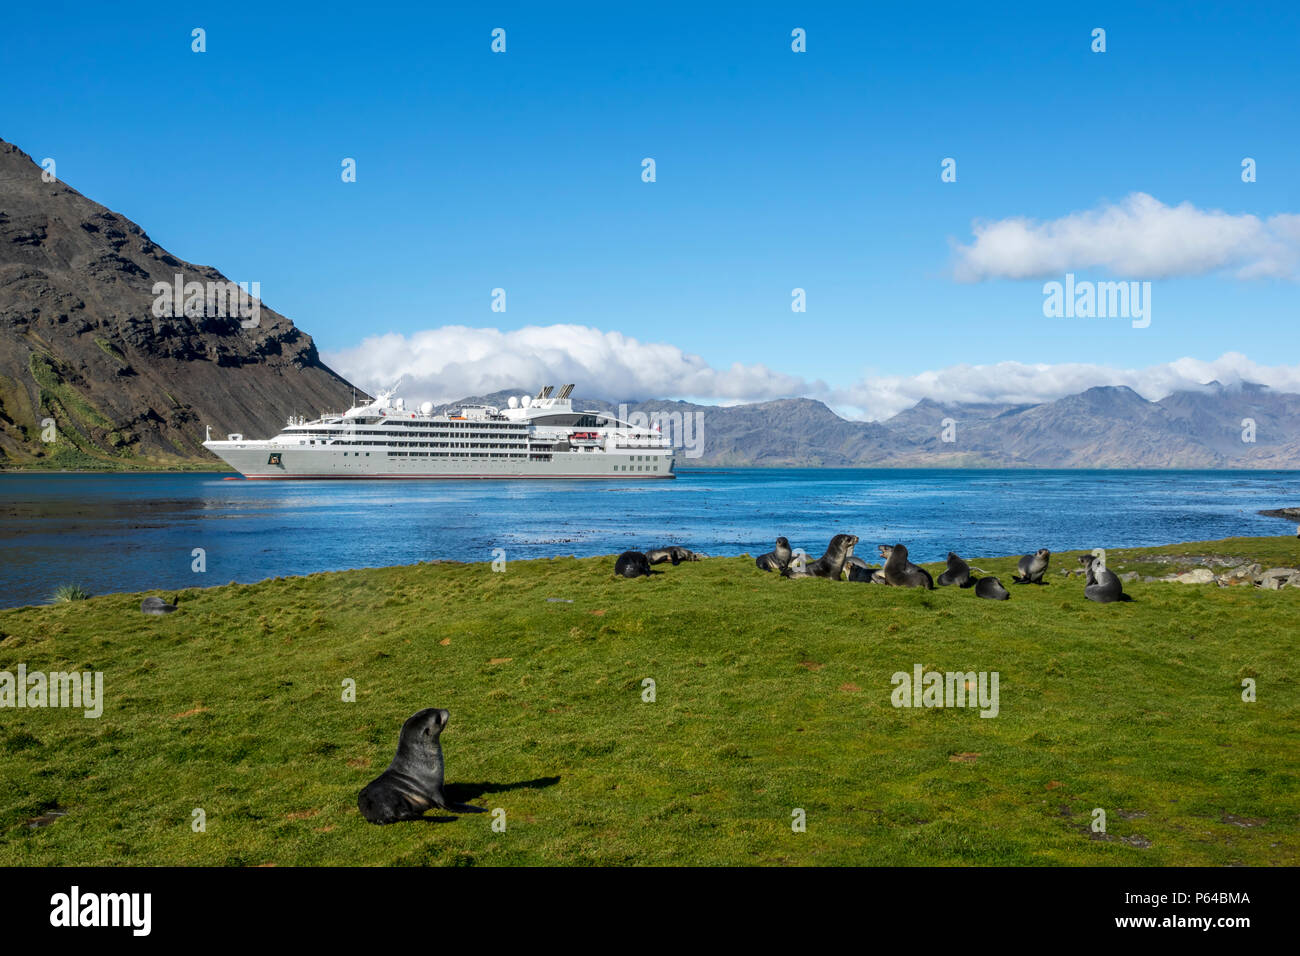 A creche of Antarctic fur seal pups in front of the French-flagged expedition ship Le Lyrial, Grytviken, South Georgia Stock Photo